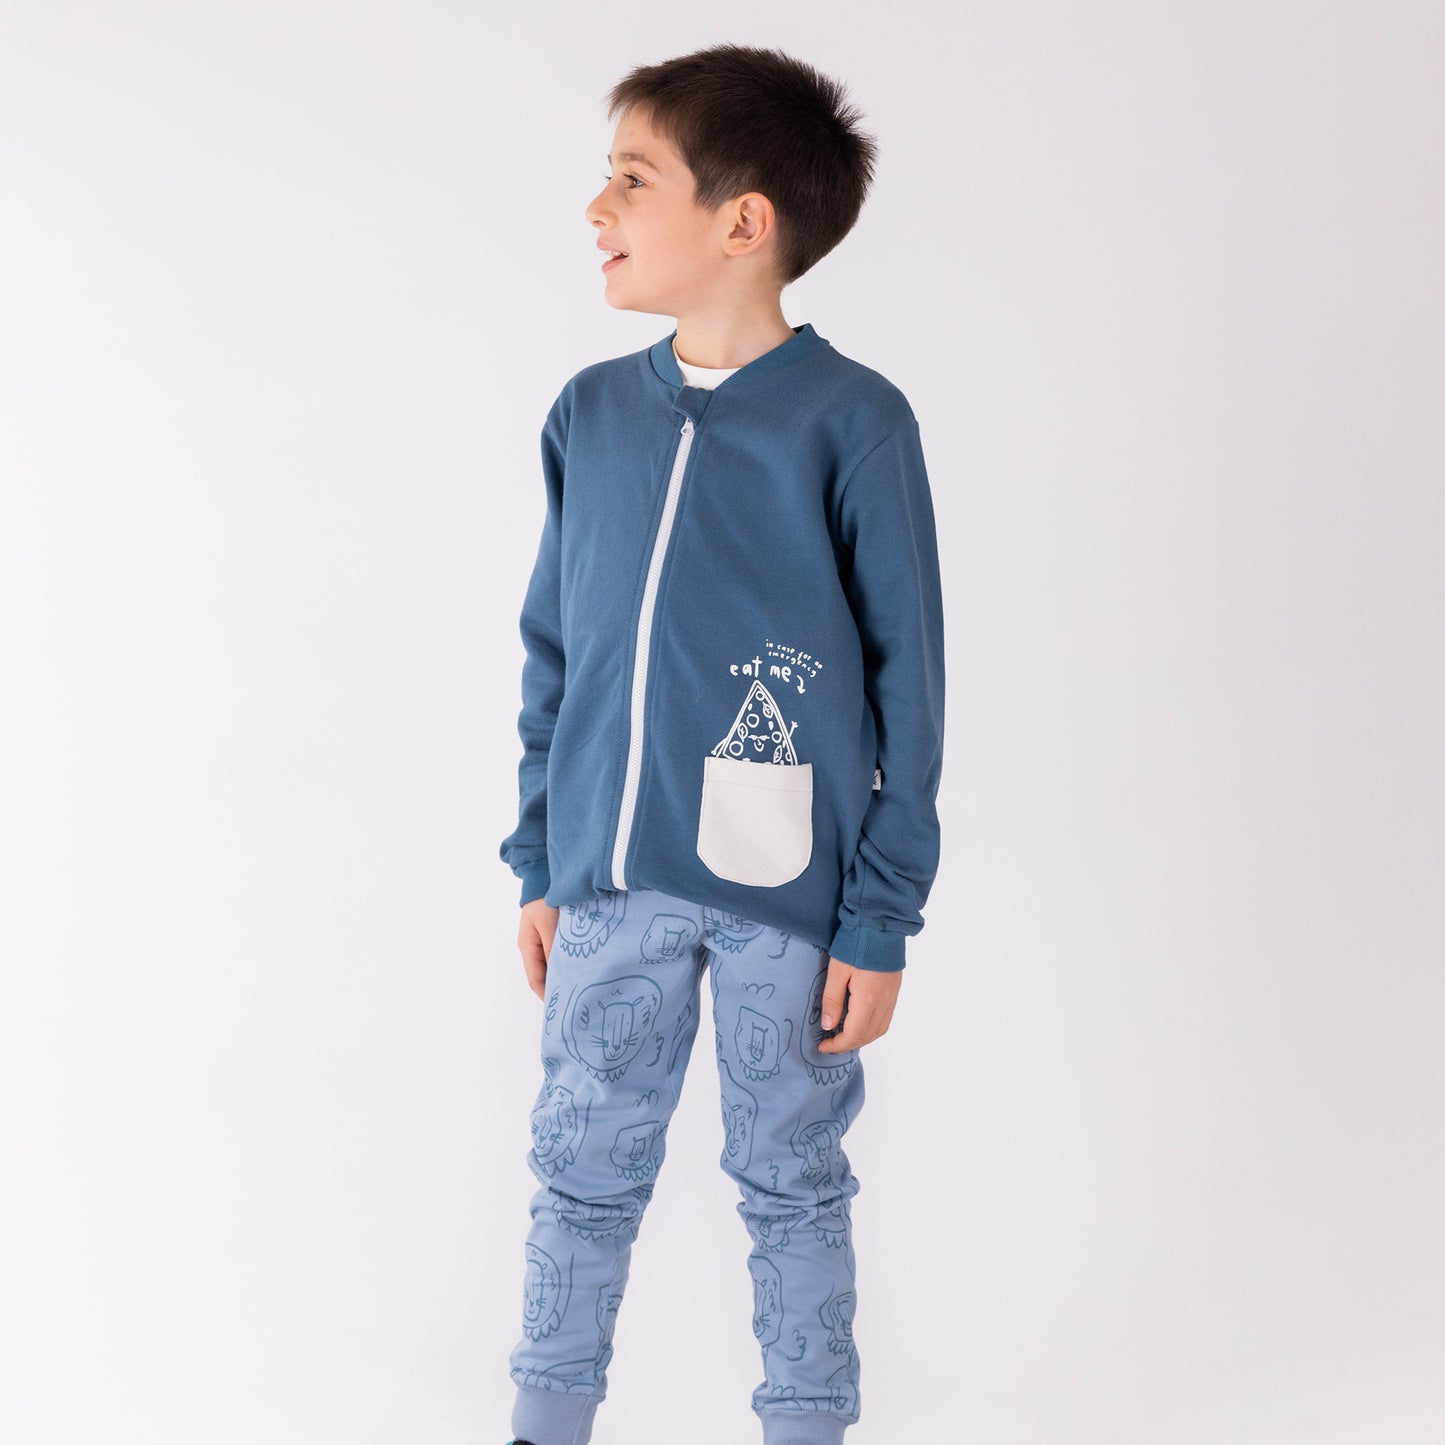 Organic "Jogger" Pants -Aged 6m to 5 Yrs- Colored Light Bue